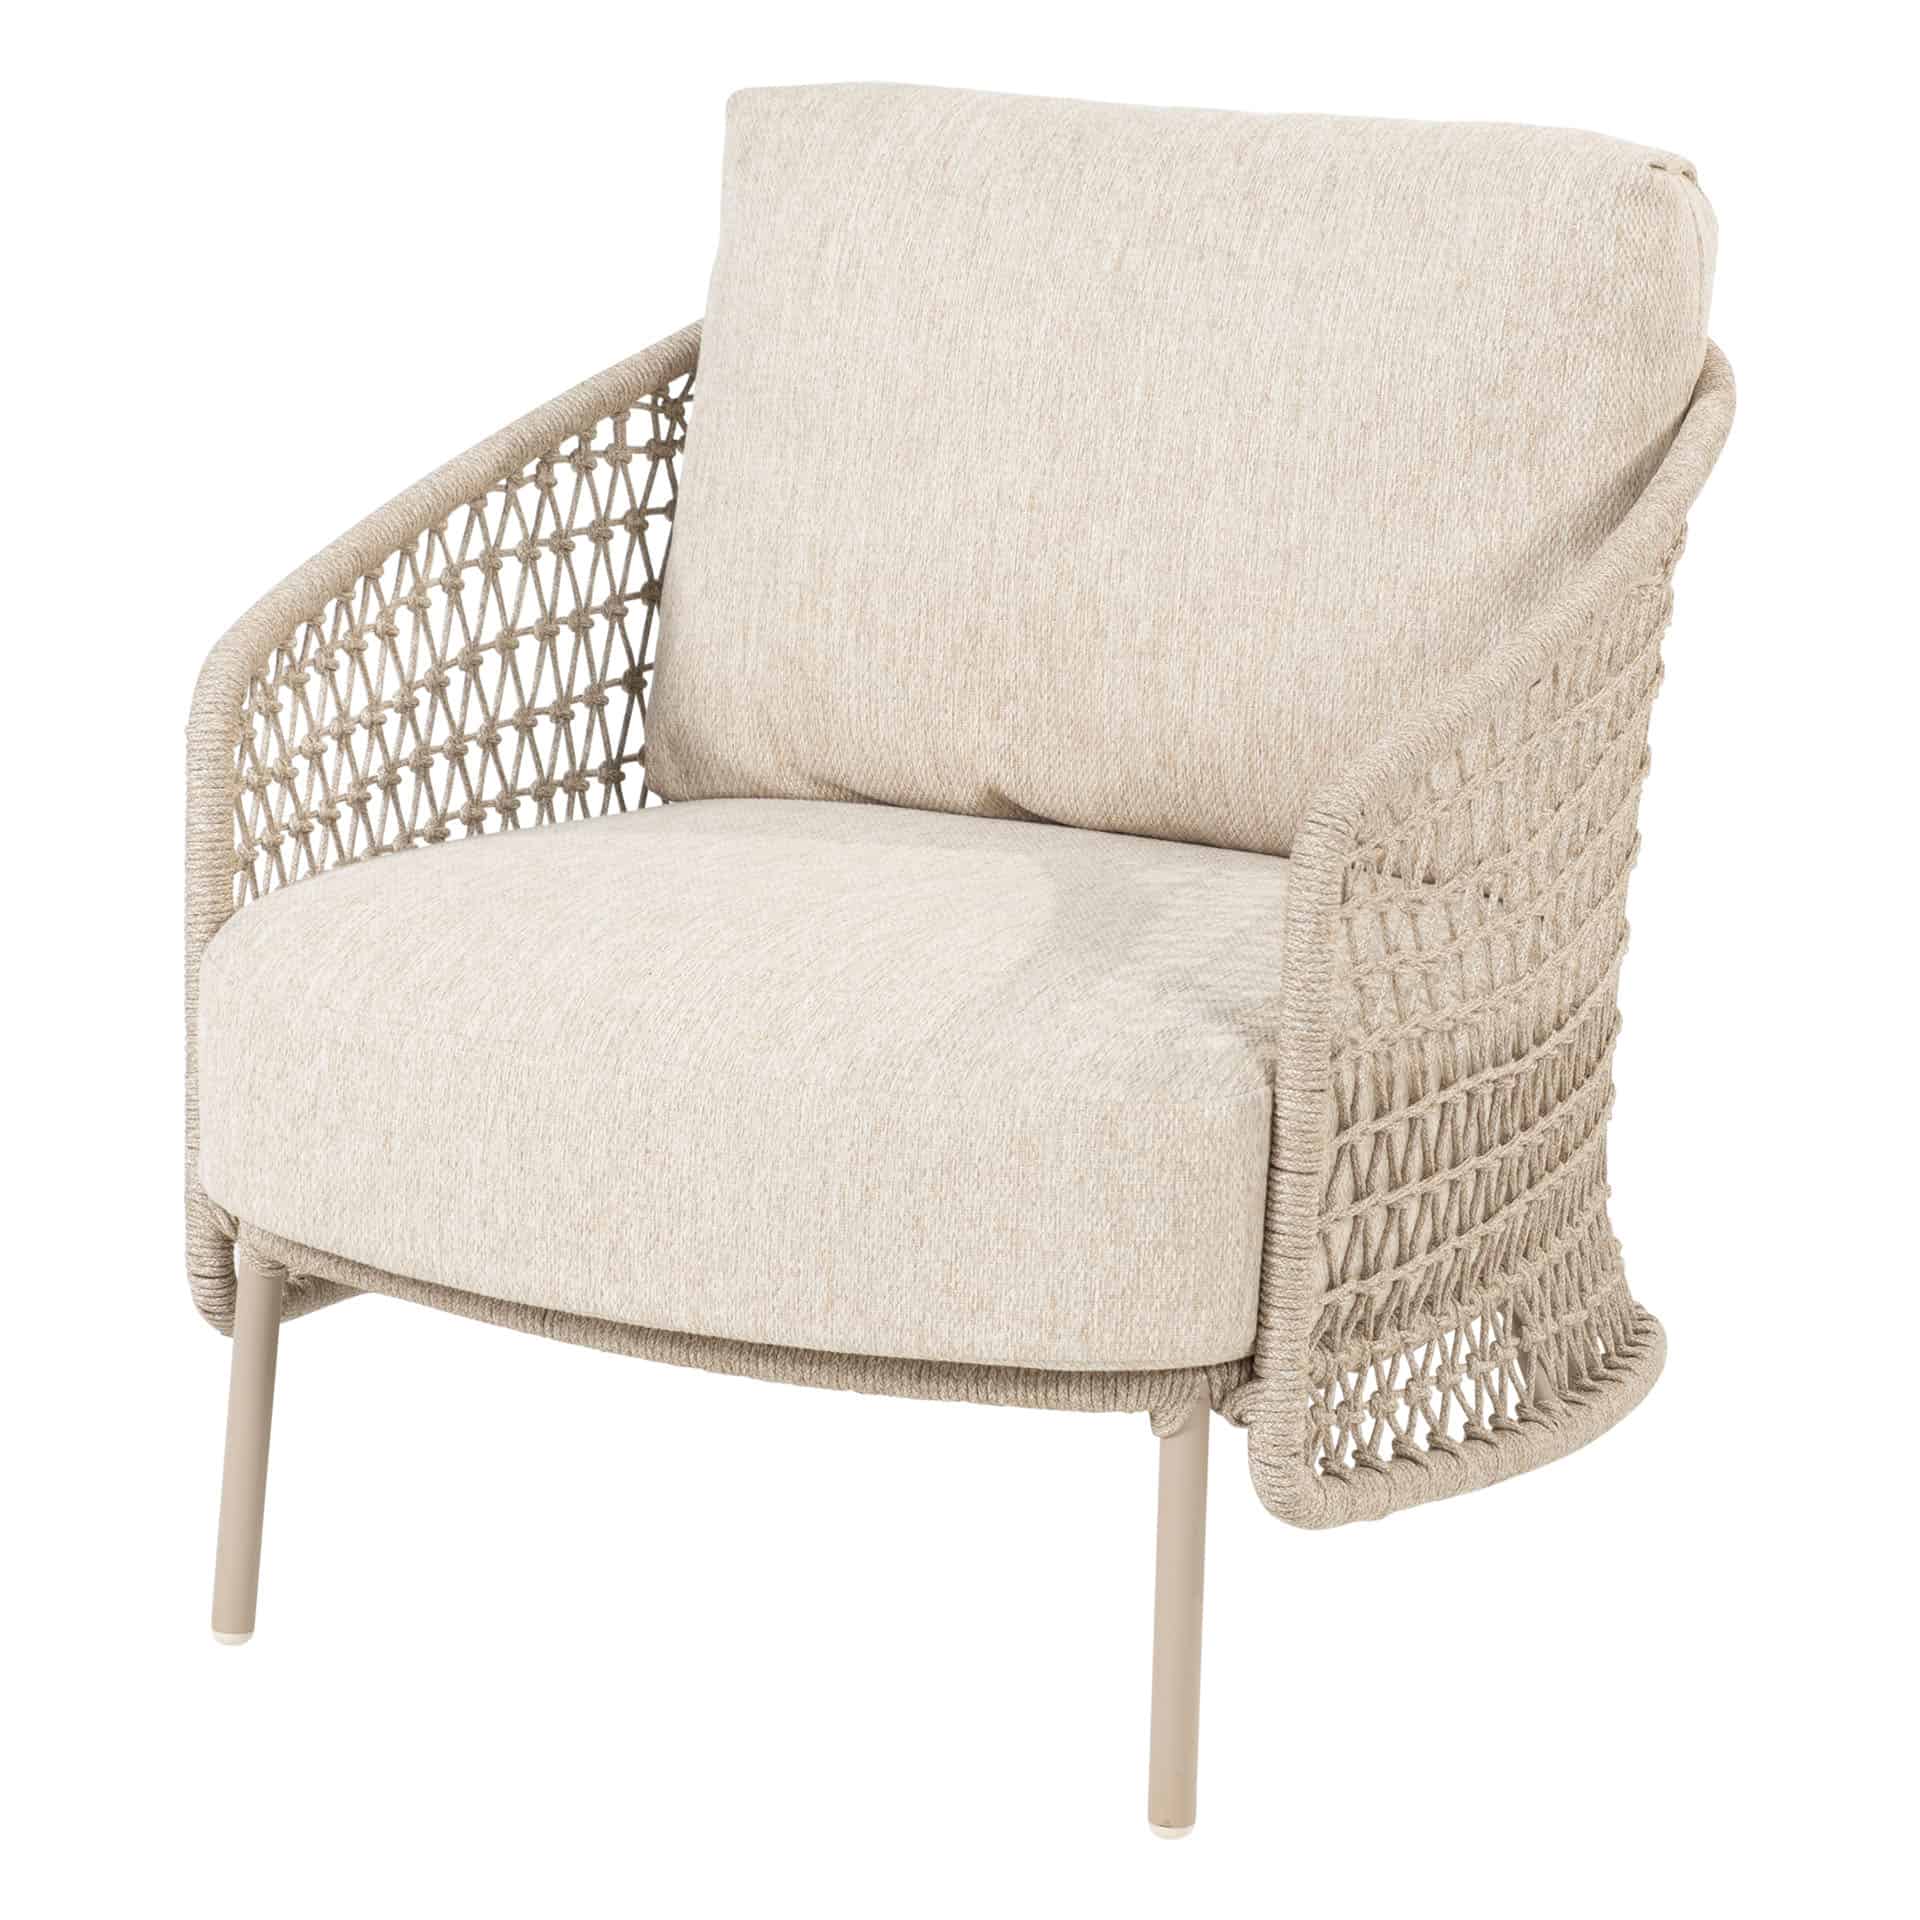 213936_-Puccini-living-chair-latte-with-2-cushions-01